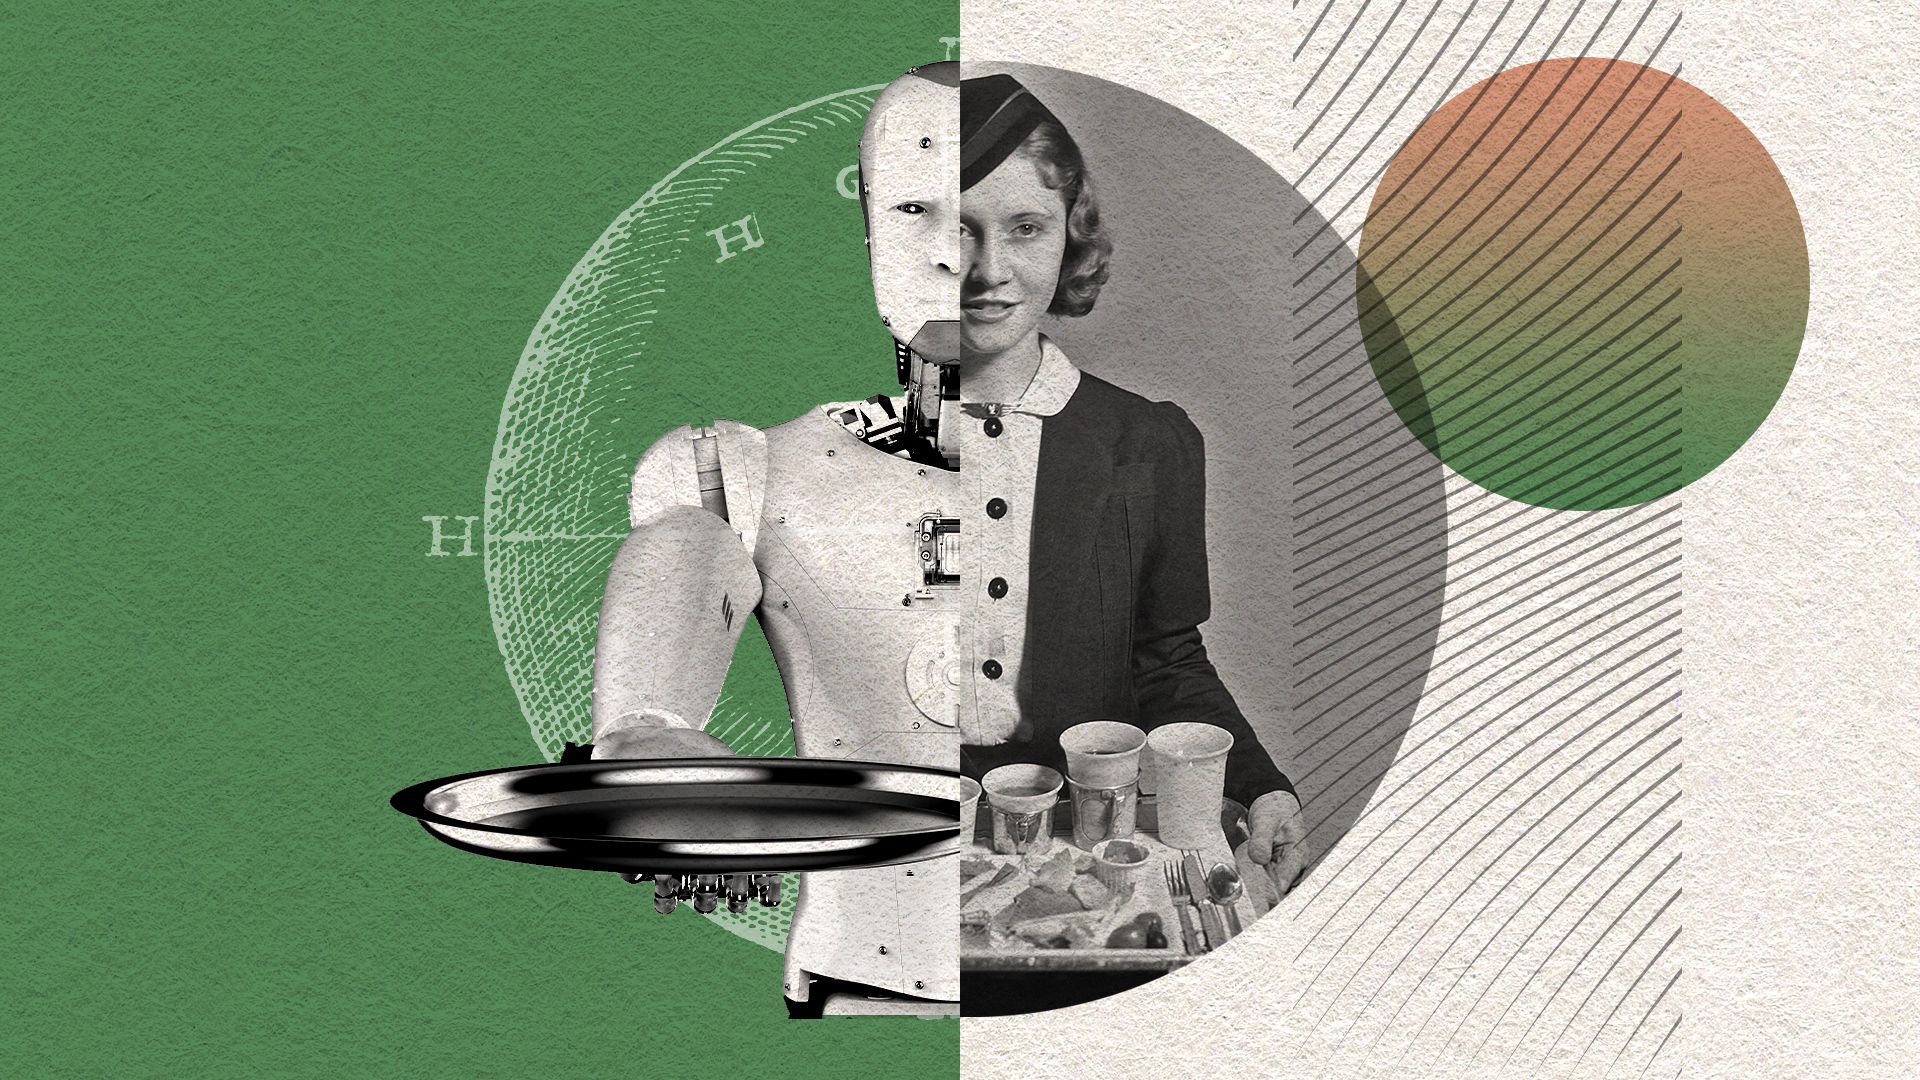 Illustrated collage of a stewardess holding a serving tray juxtaposed against a robot holding a serving tray. 